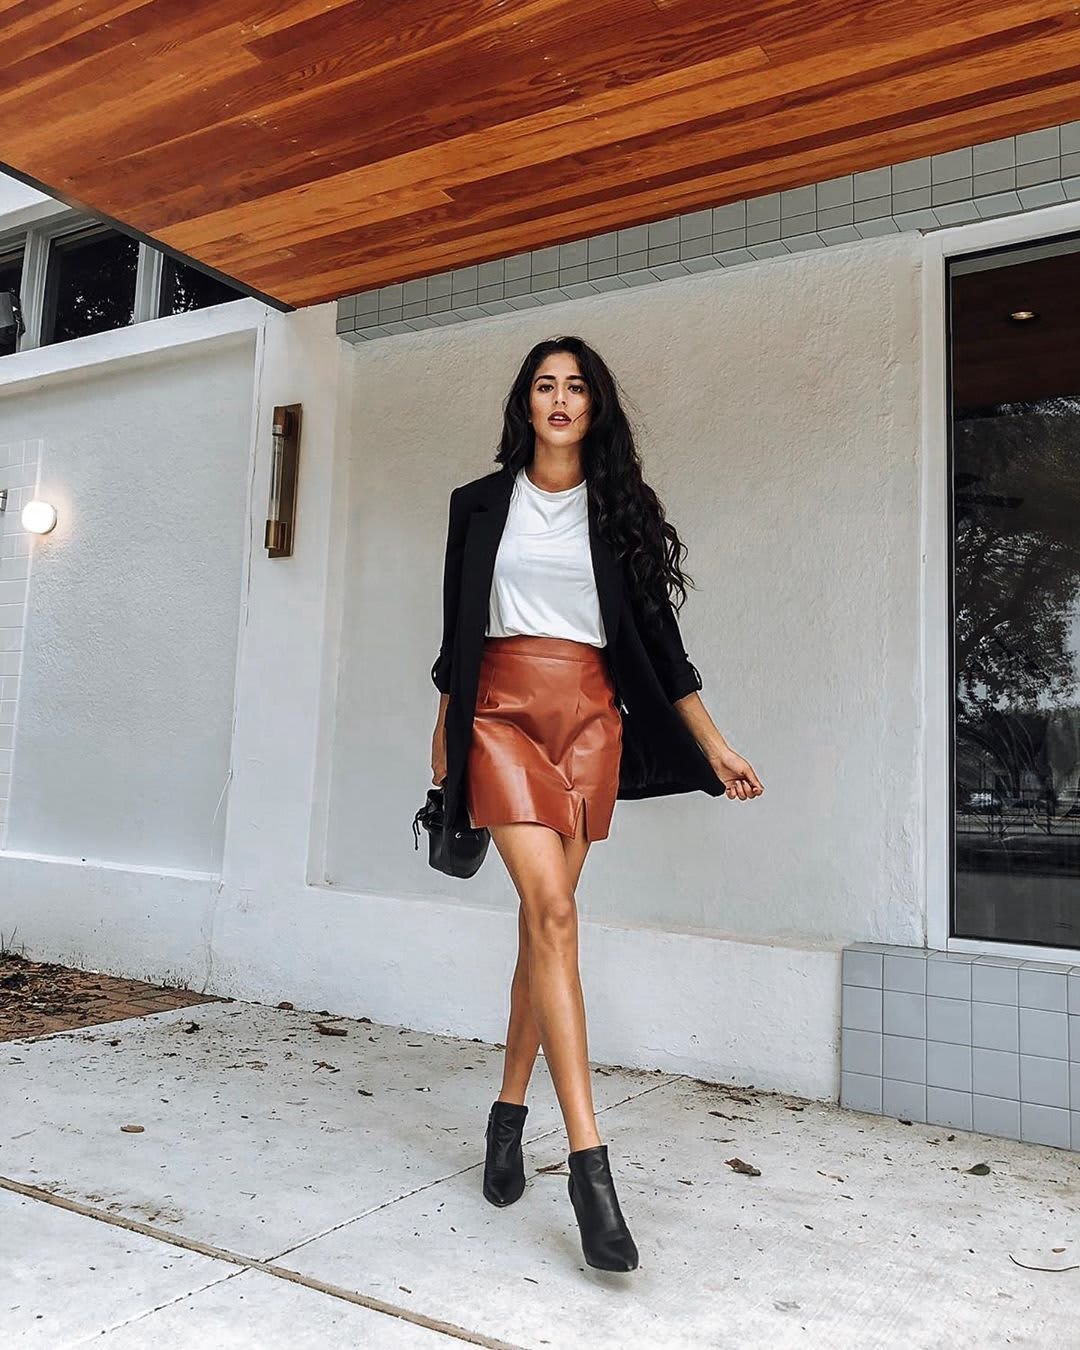 Leather Skirt and Thigh High Boots Outfit: Chic Edge